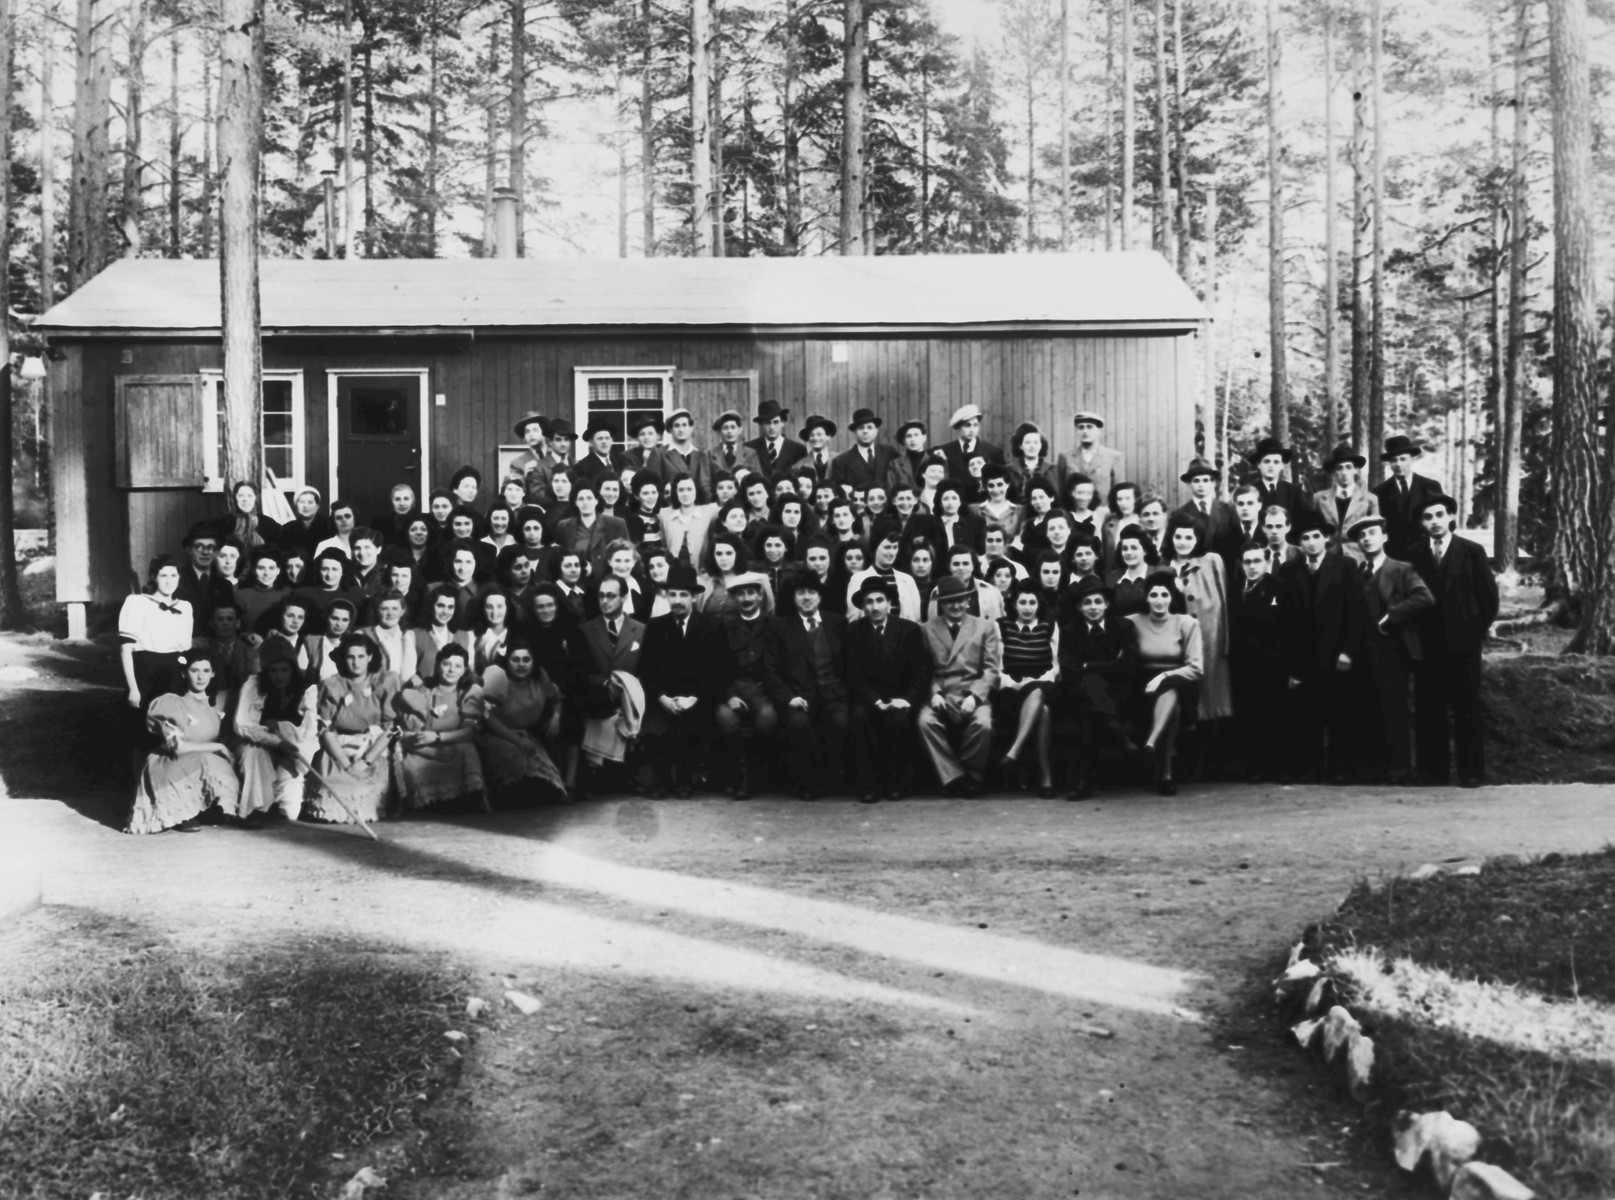 Group portrait of religious Jewish displaced persons in Sweden.

Regina Pollack is pictured in the third row, second from the right.